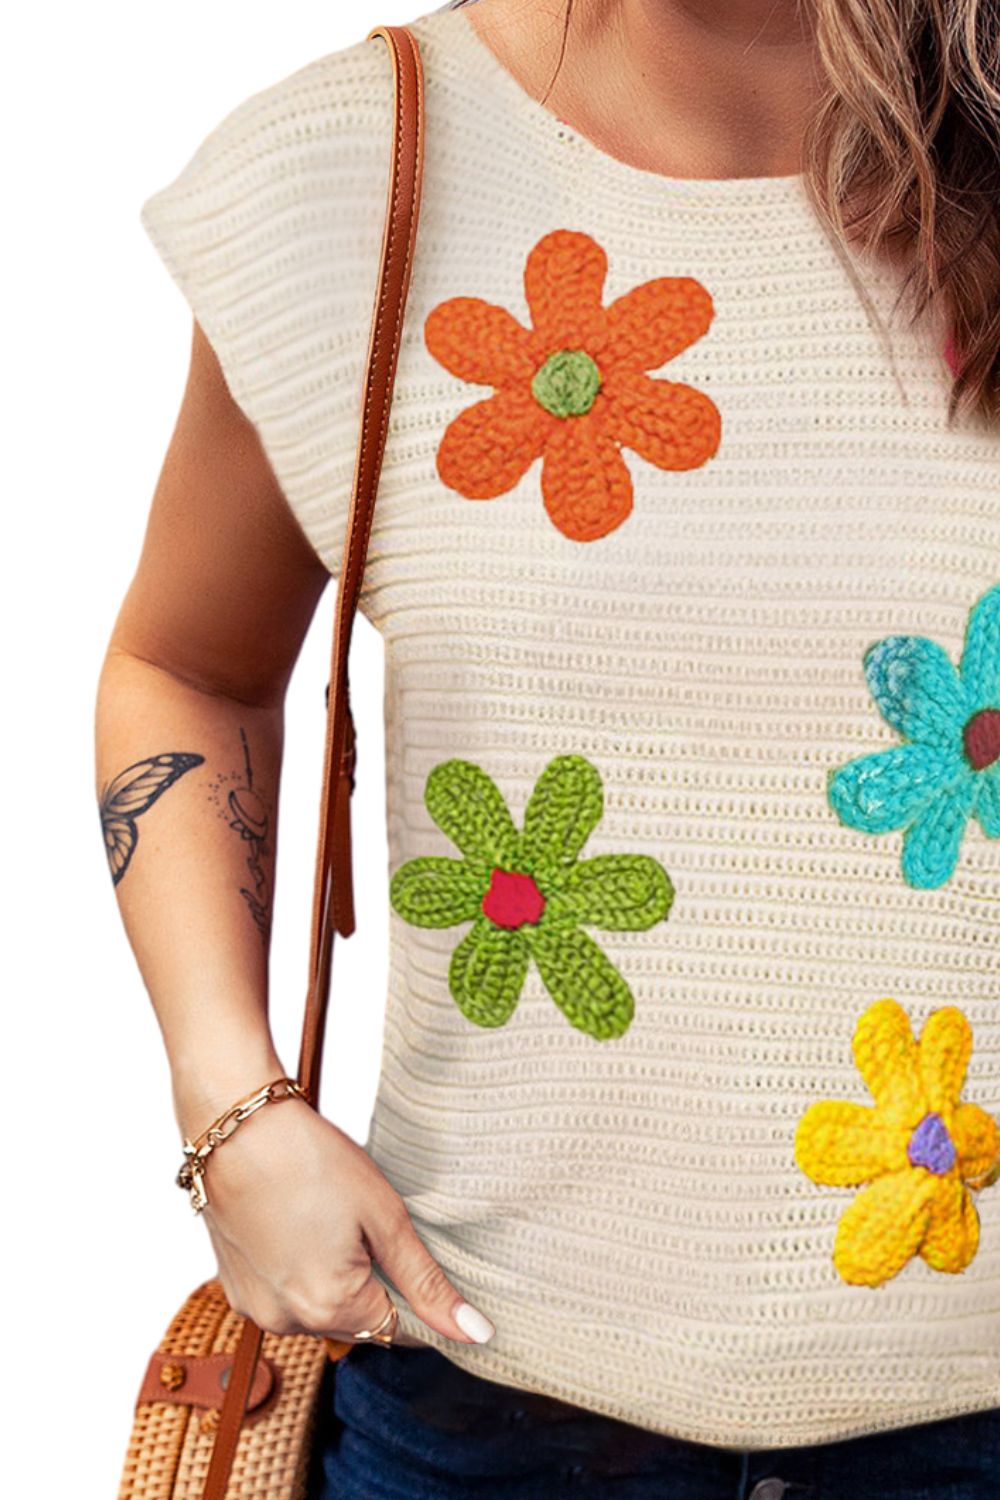 Embrace spring with our Flower Knit Top—perfect for adding a touch of floral charm and comfort to your everyday style